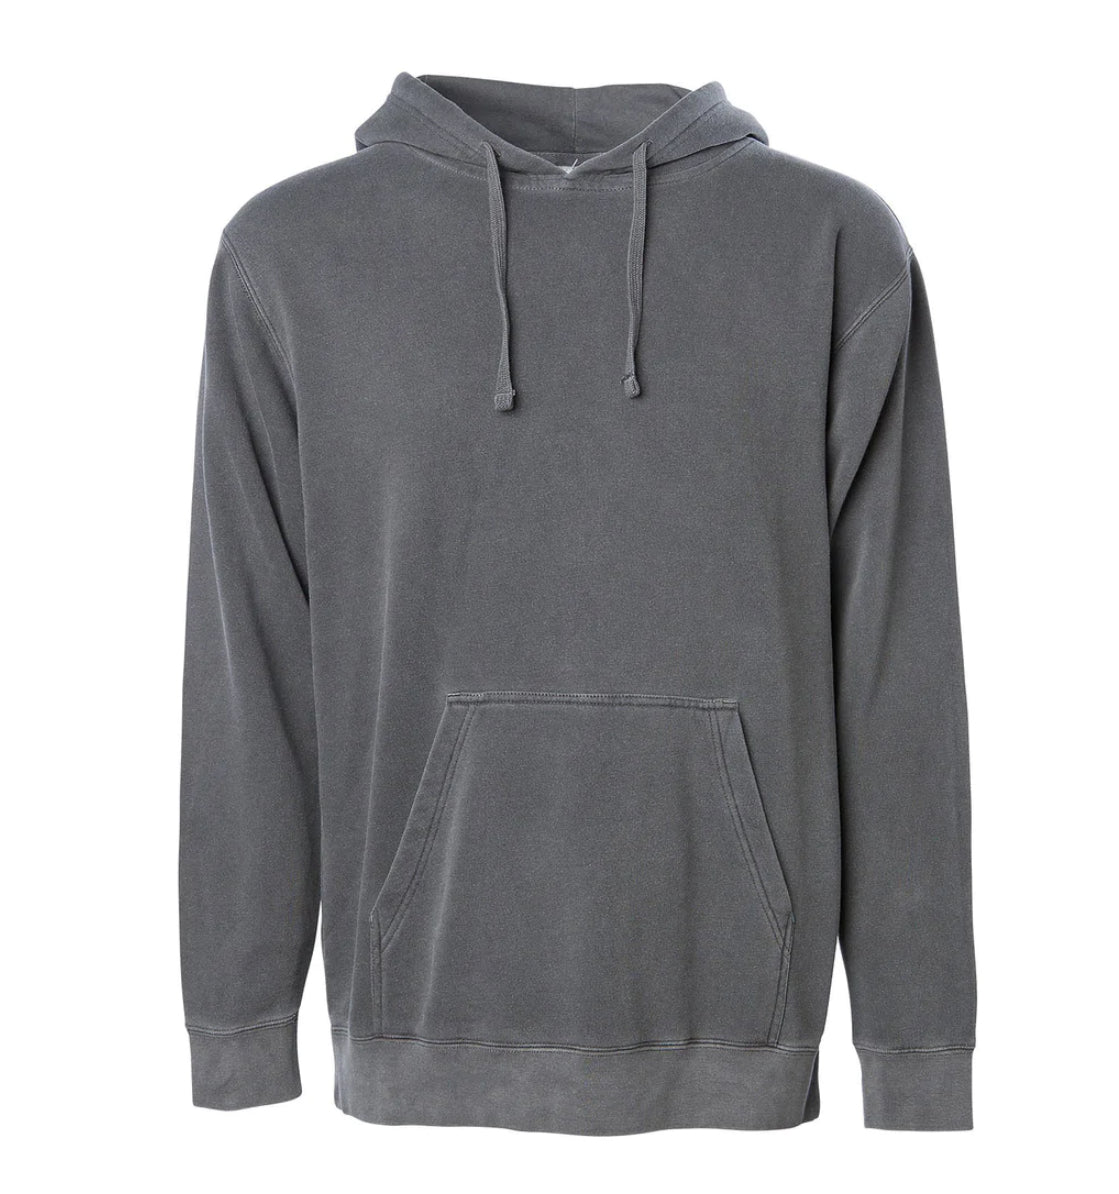 EWC Charcoal Grey Pigment Dyed Hoodie